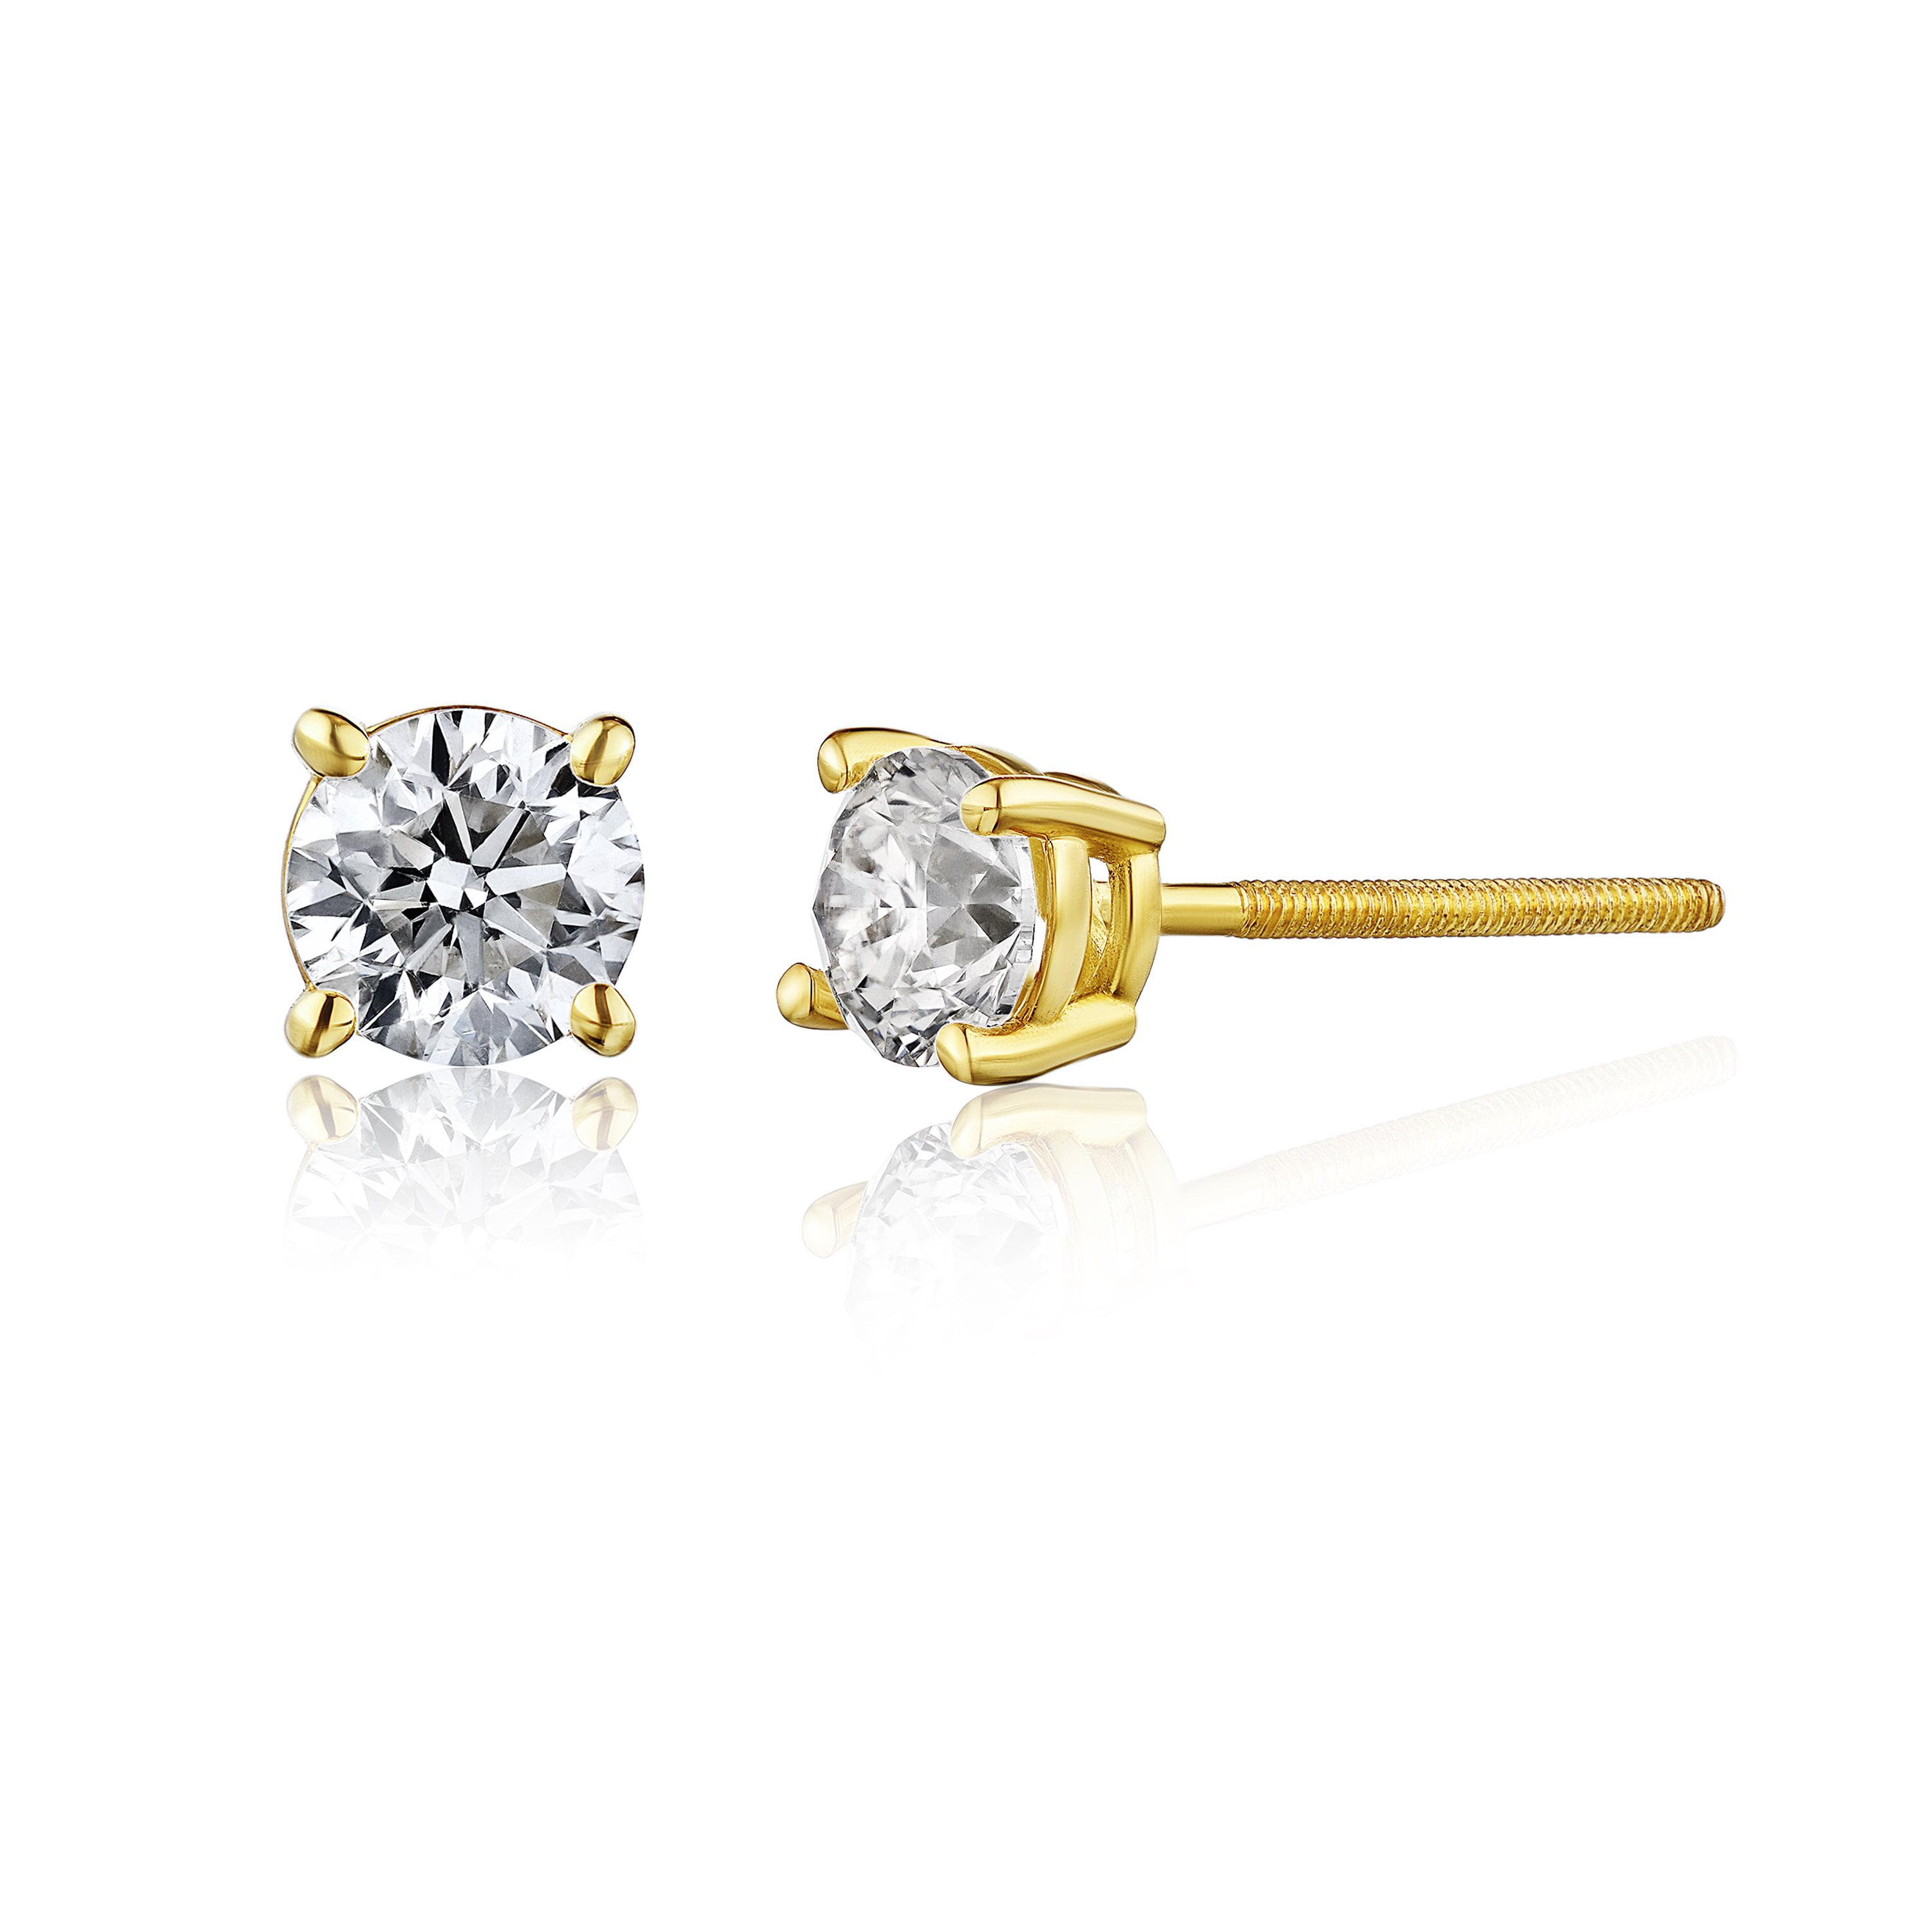 Details about   Diamond Stud Earrings 14k Yellow Gold Screw Back For Kids And Women 